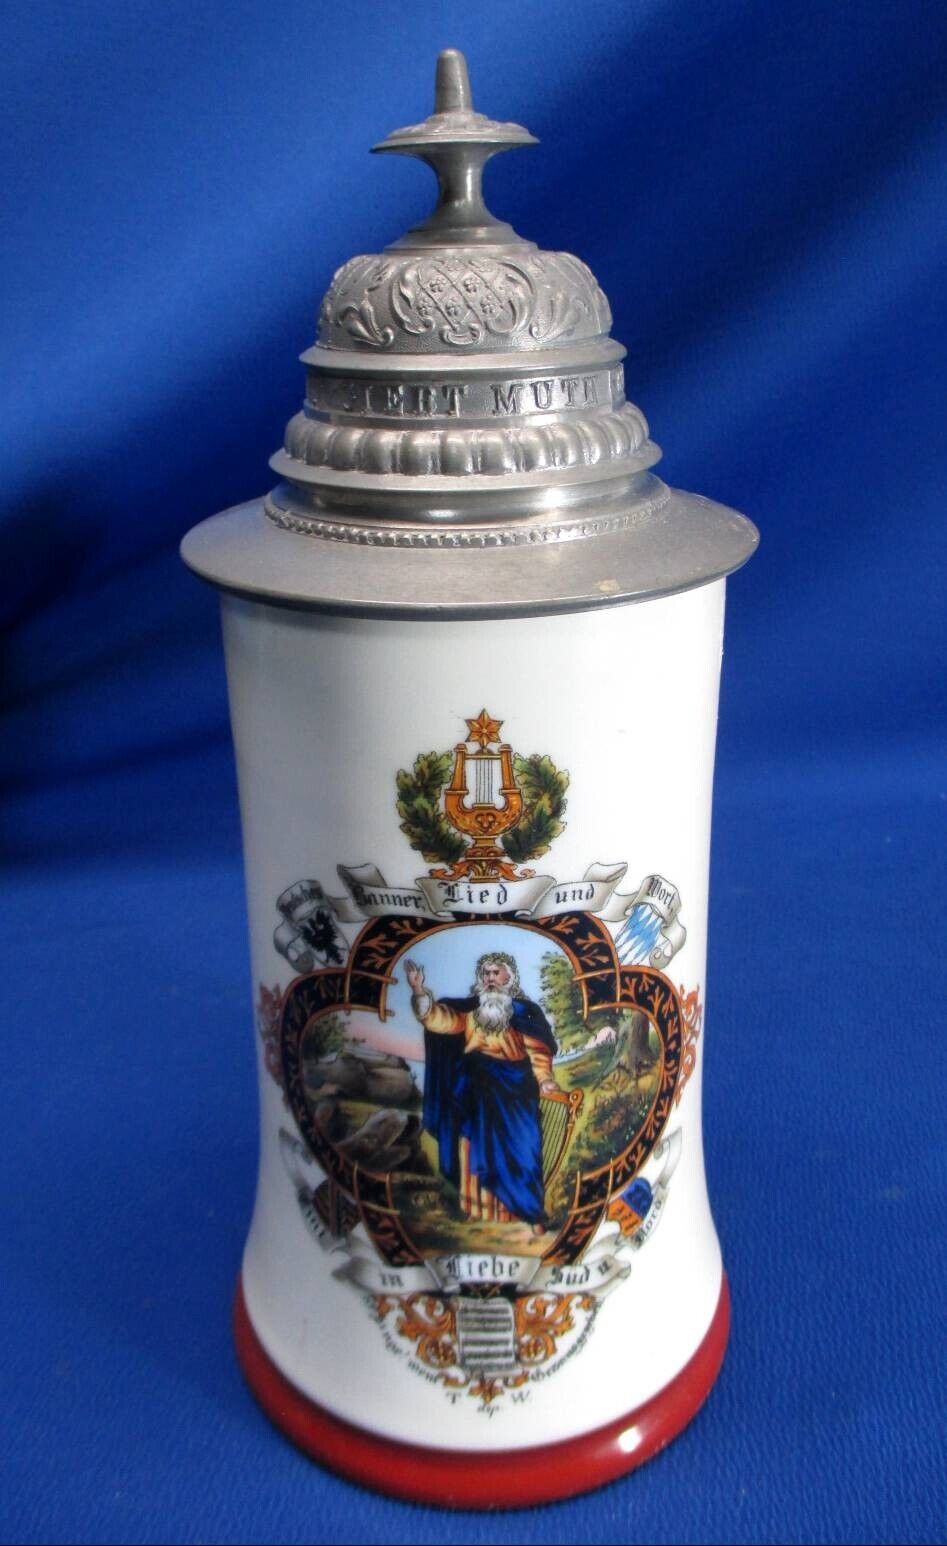 BEAUTIFUL GERMAN PEWTER LIDDED STEIN WITH LITHOPHANE MOSES SCENE DECORATION